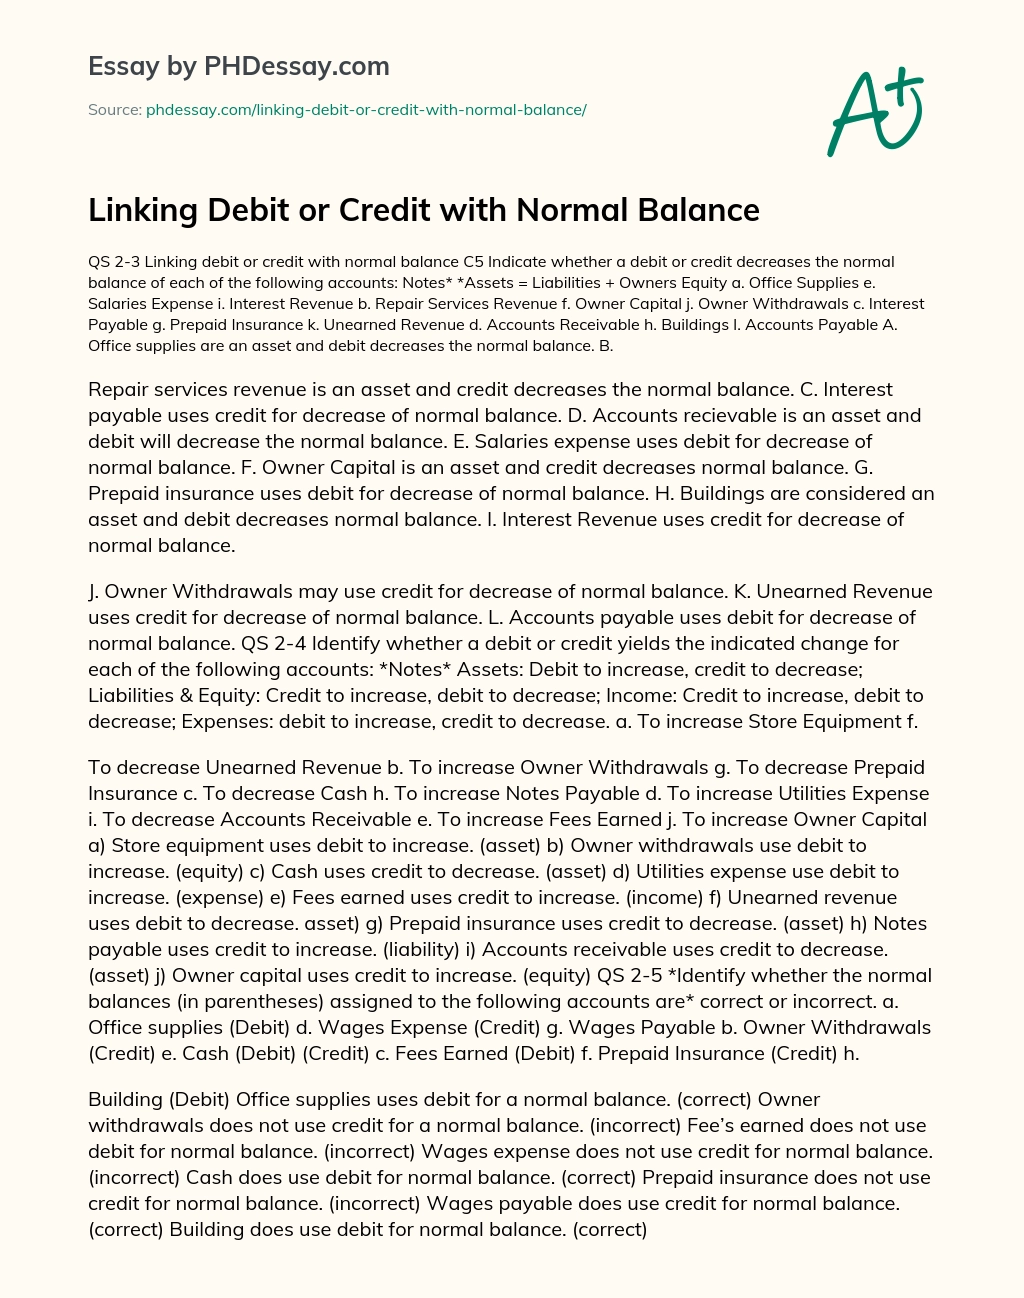 Linking Debit or Credit with Normal Balance essay